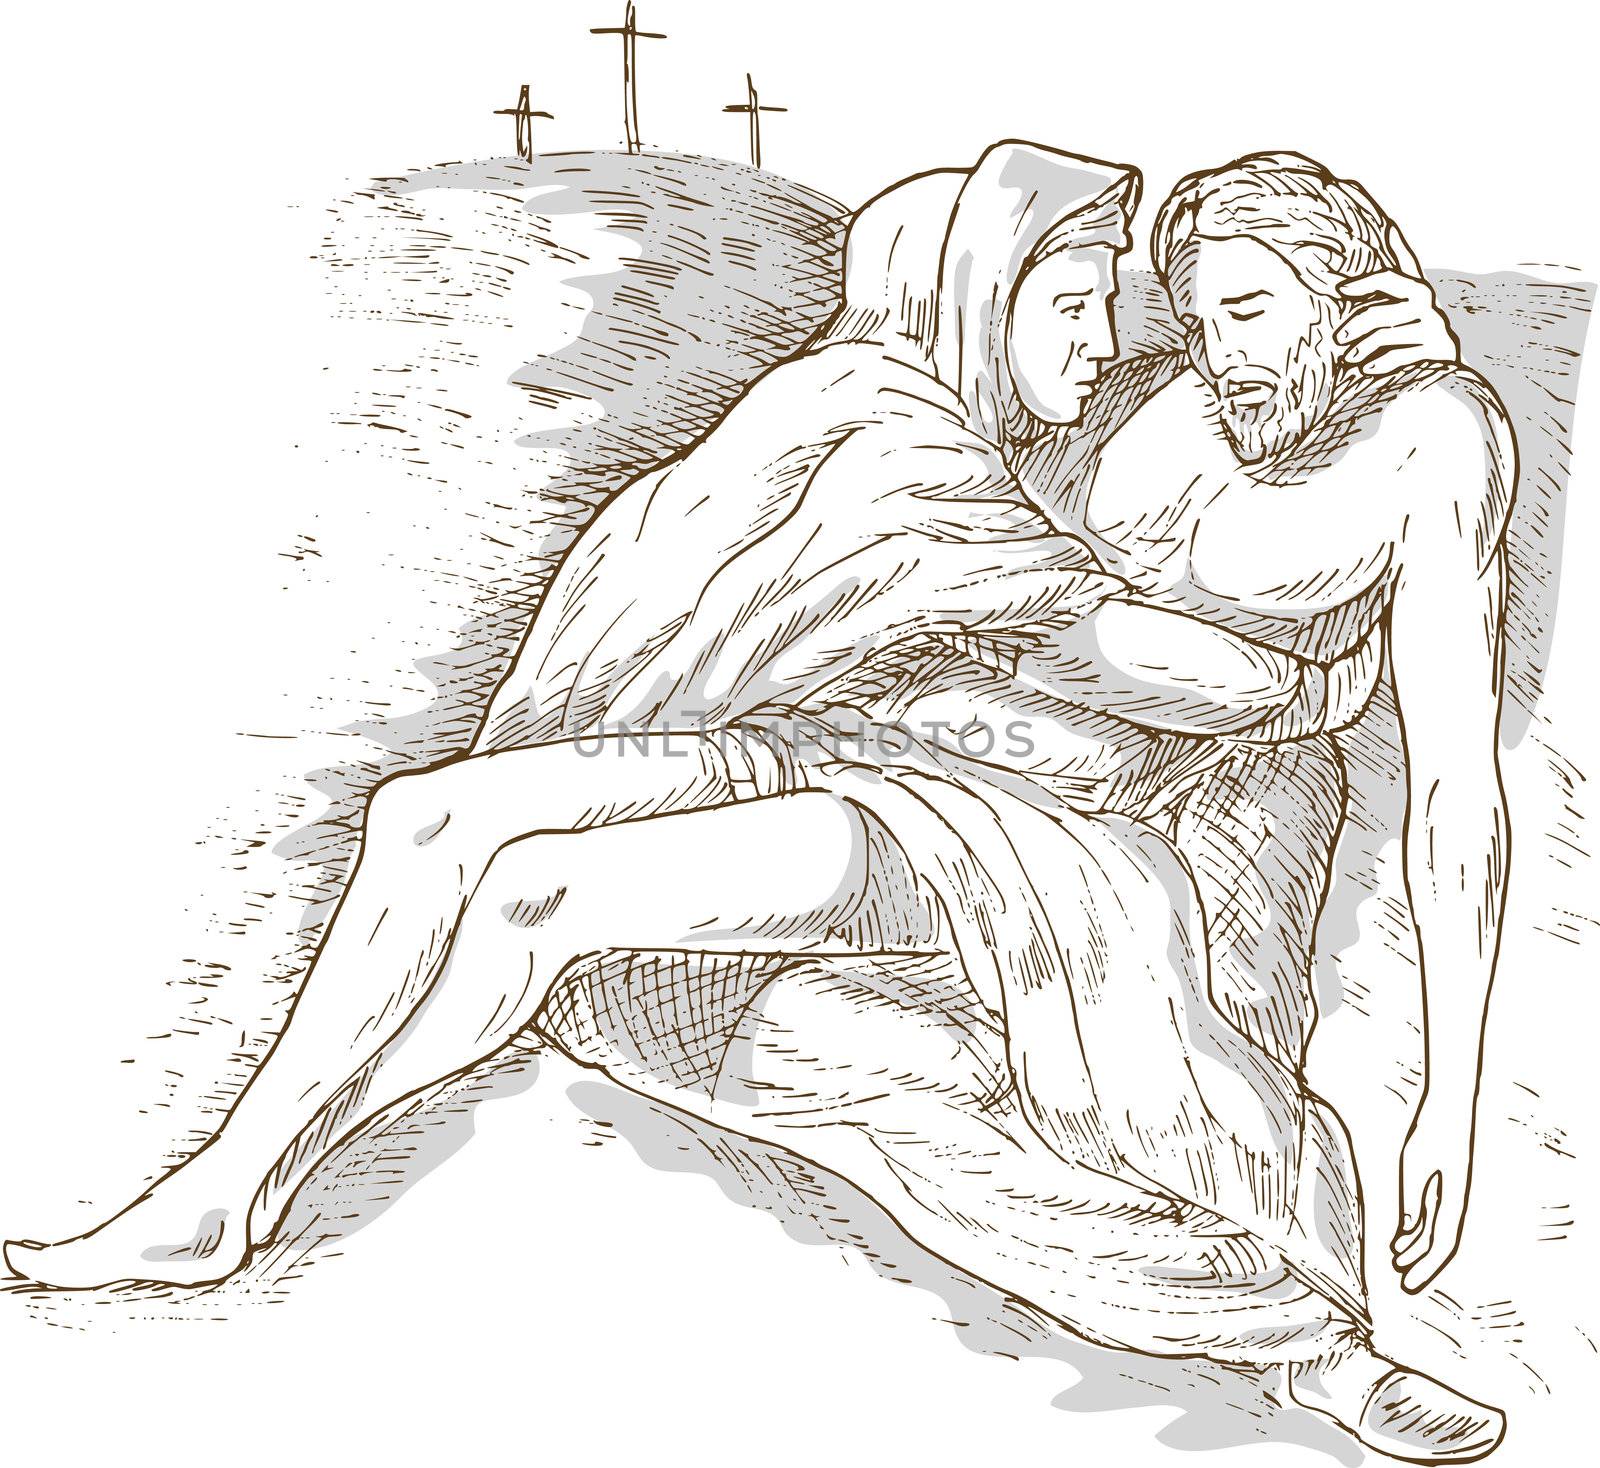 hand sketch drawing illustration of Mother Mary and the dead Jesus Christ with the cross of Calvary in the background isolated on white with gray wash